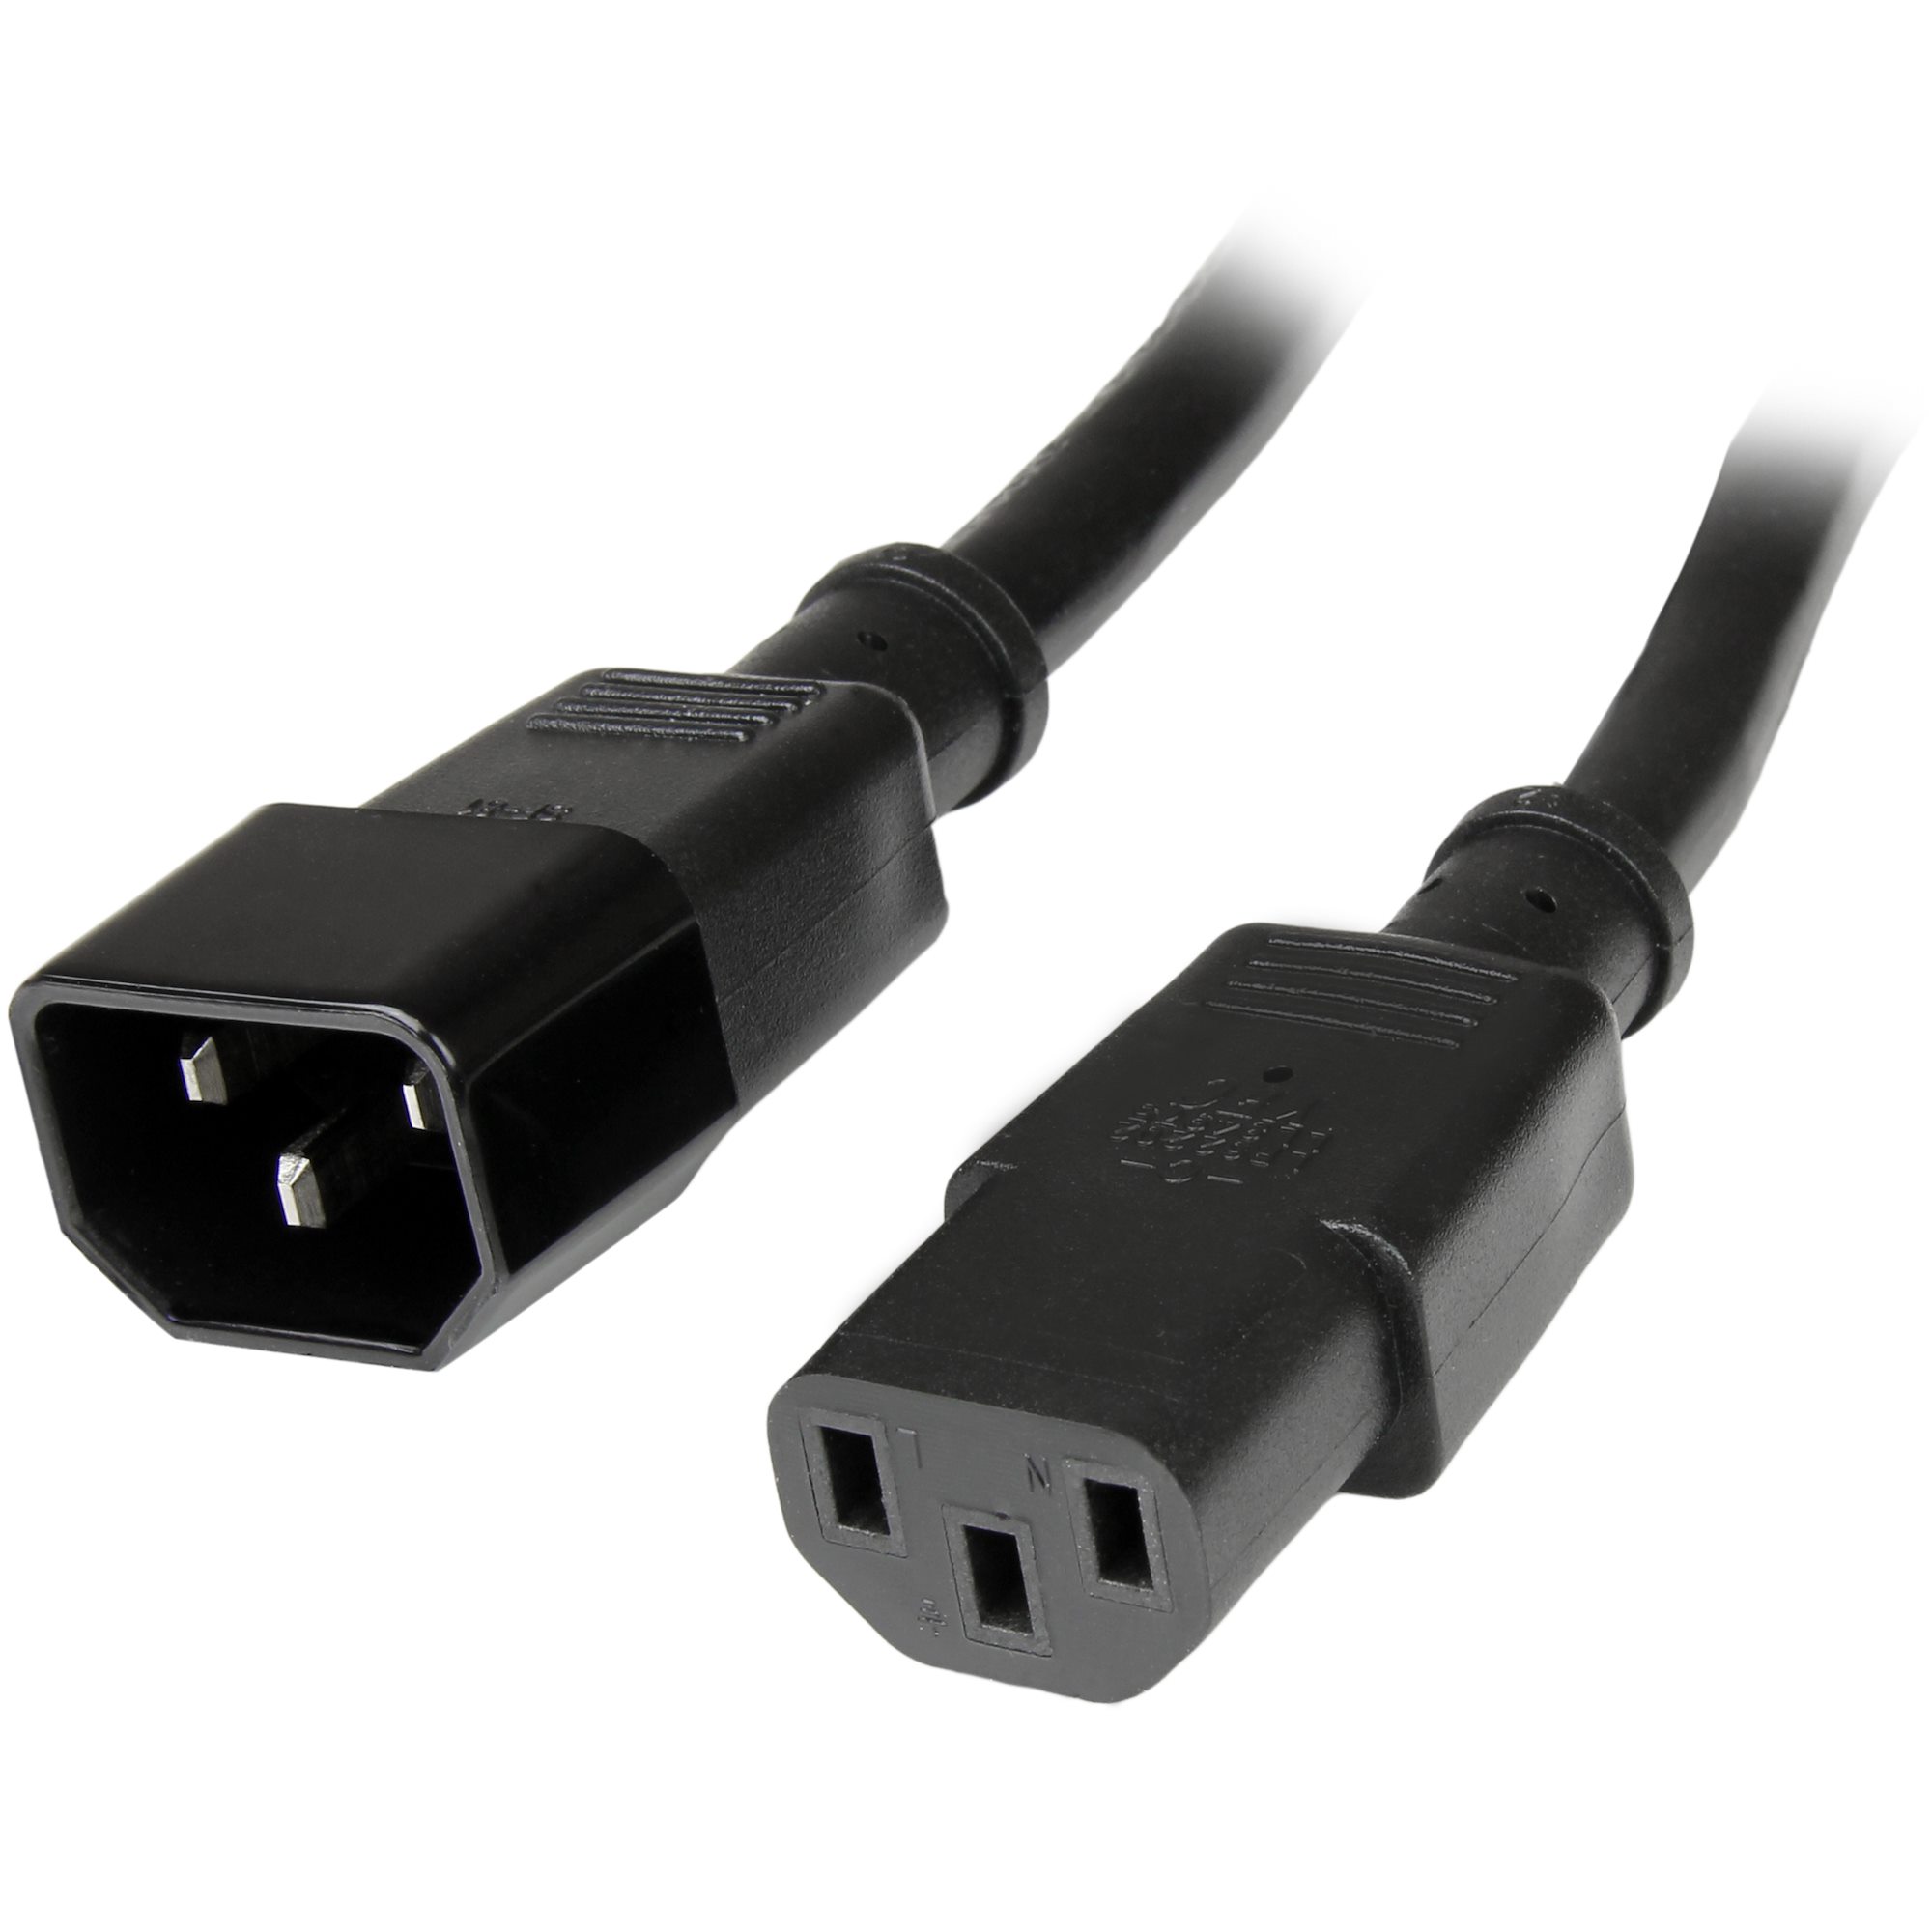 New Heavy Duty 3 Prong 13FT Power Cable Cord ExtenderComputers IEC C13 to C14 